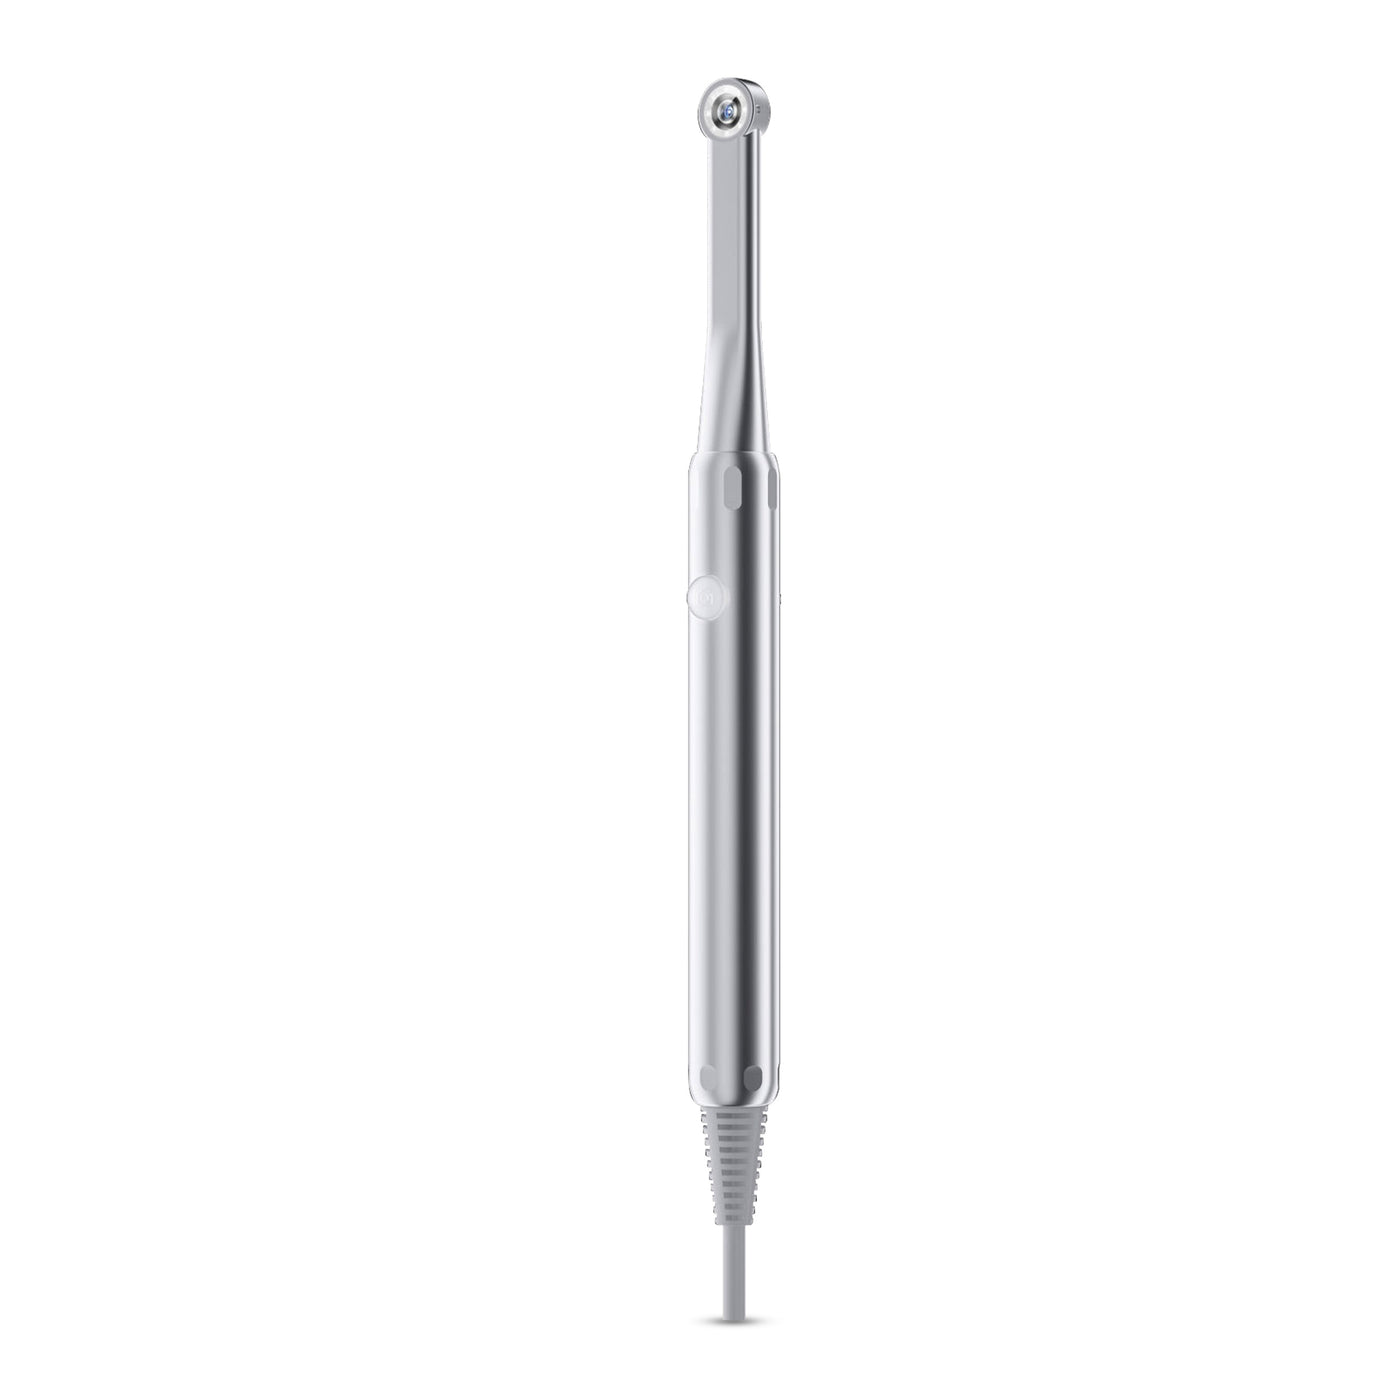 A sleek, metallic dental handpiece with an elongated handle and a small, circular head at the top. The VSDent Intraoral Camera KP Cam-one, which features an integrated intraoral camera for precise imaging, has a cord extending from the bottom and its surface is smooth and shiny. (8951571841334)